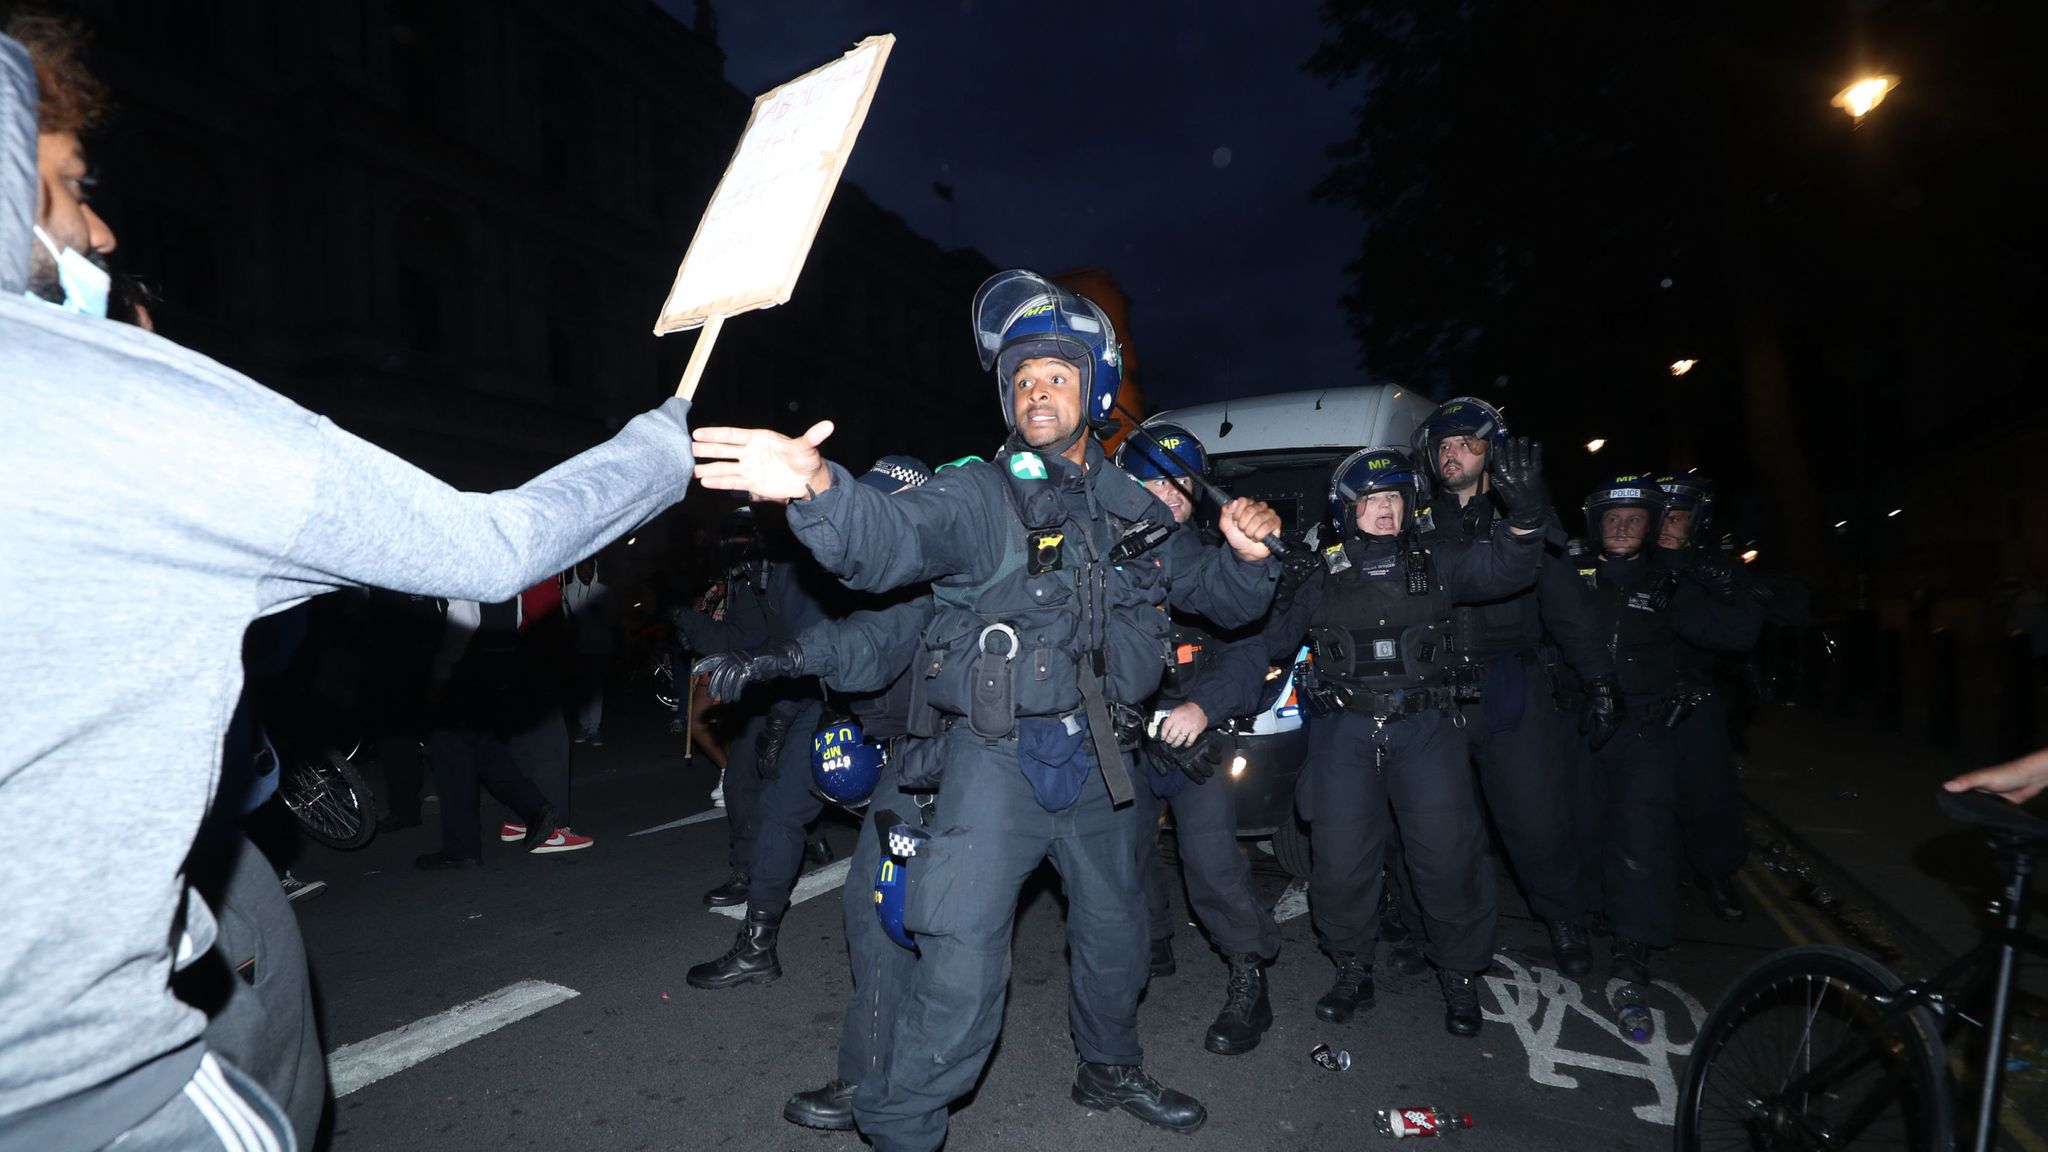 Black Lives Matter London protests: Scuffles with police mar mainly ...